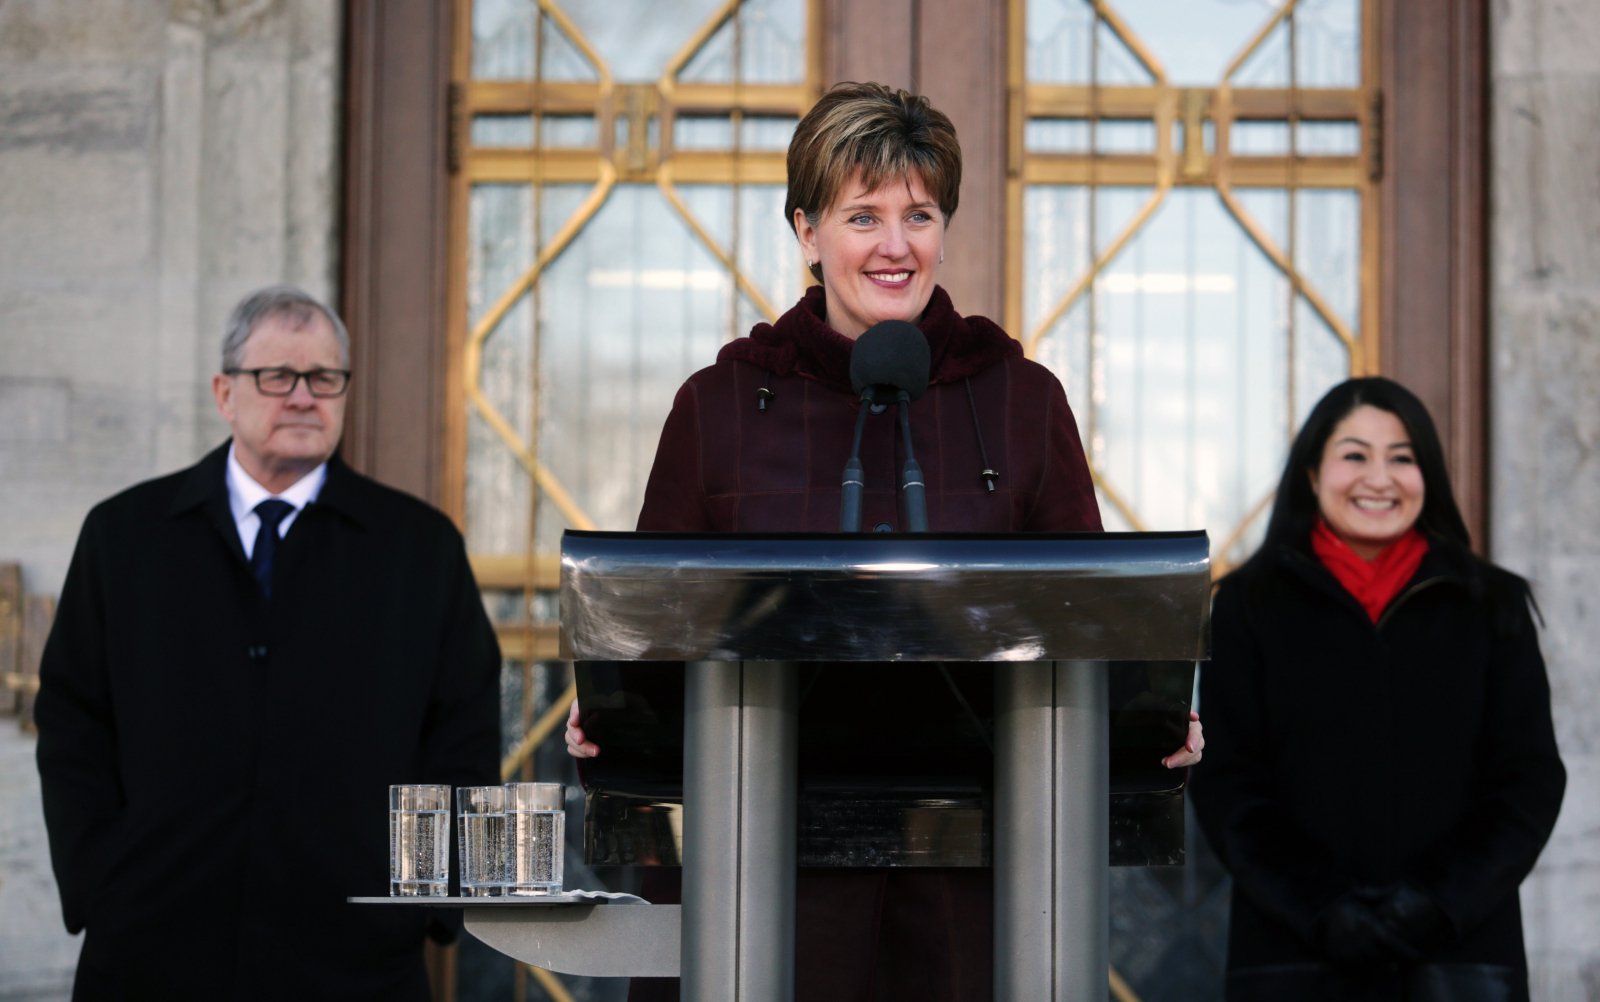 Agriculture Minister Marie-Claude Bibeau speaks to reporters, alongside cabinet colleagues Lawrence MacAuley and Maryam Monsef outside Rideau Hall in Ottawa, following a cabinet shuffle on March 1, 2019. Photo by Andrew Meade